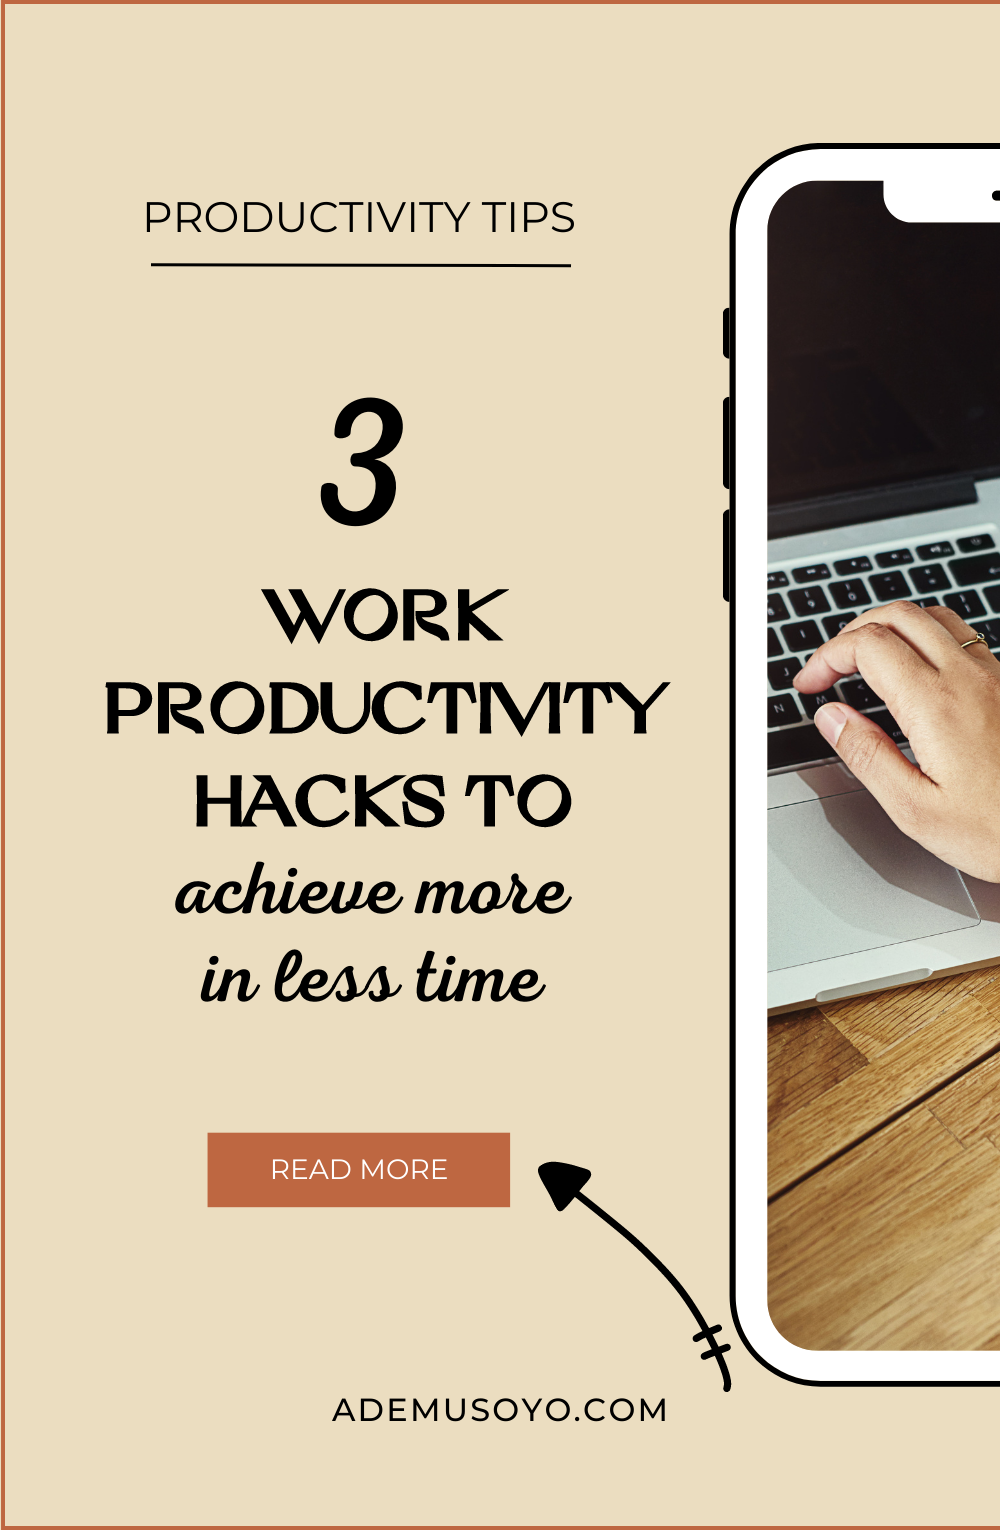 Explore this comprehensive guide filled with practical tips and ideas to boost your work productivity. From time management techniques to efficiency hacks, this post has everything you need to maximize your output and accomplish your goals like a pro. Check out ademusoyo.com to learn more ways to be productive at work!